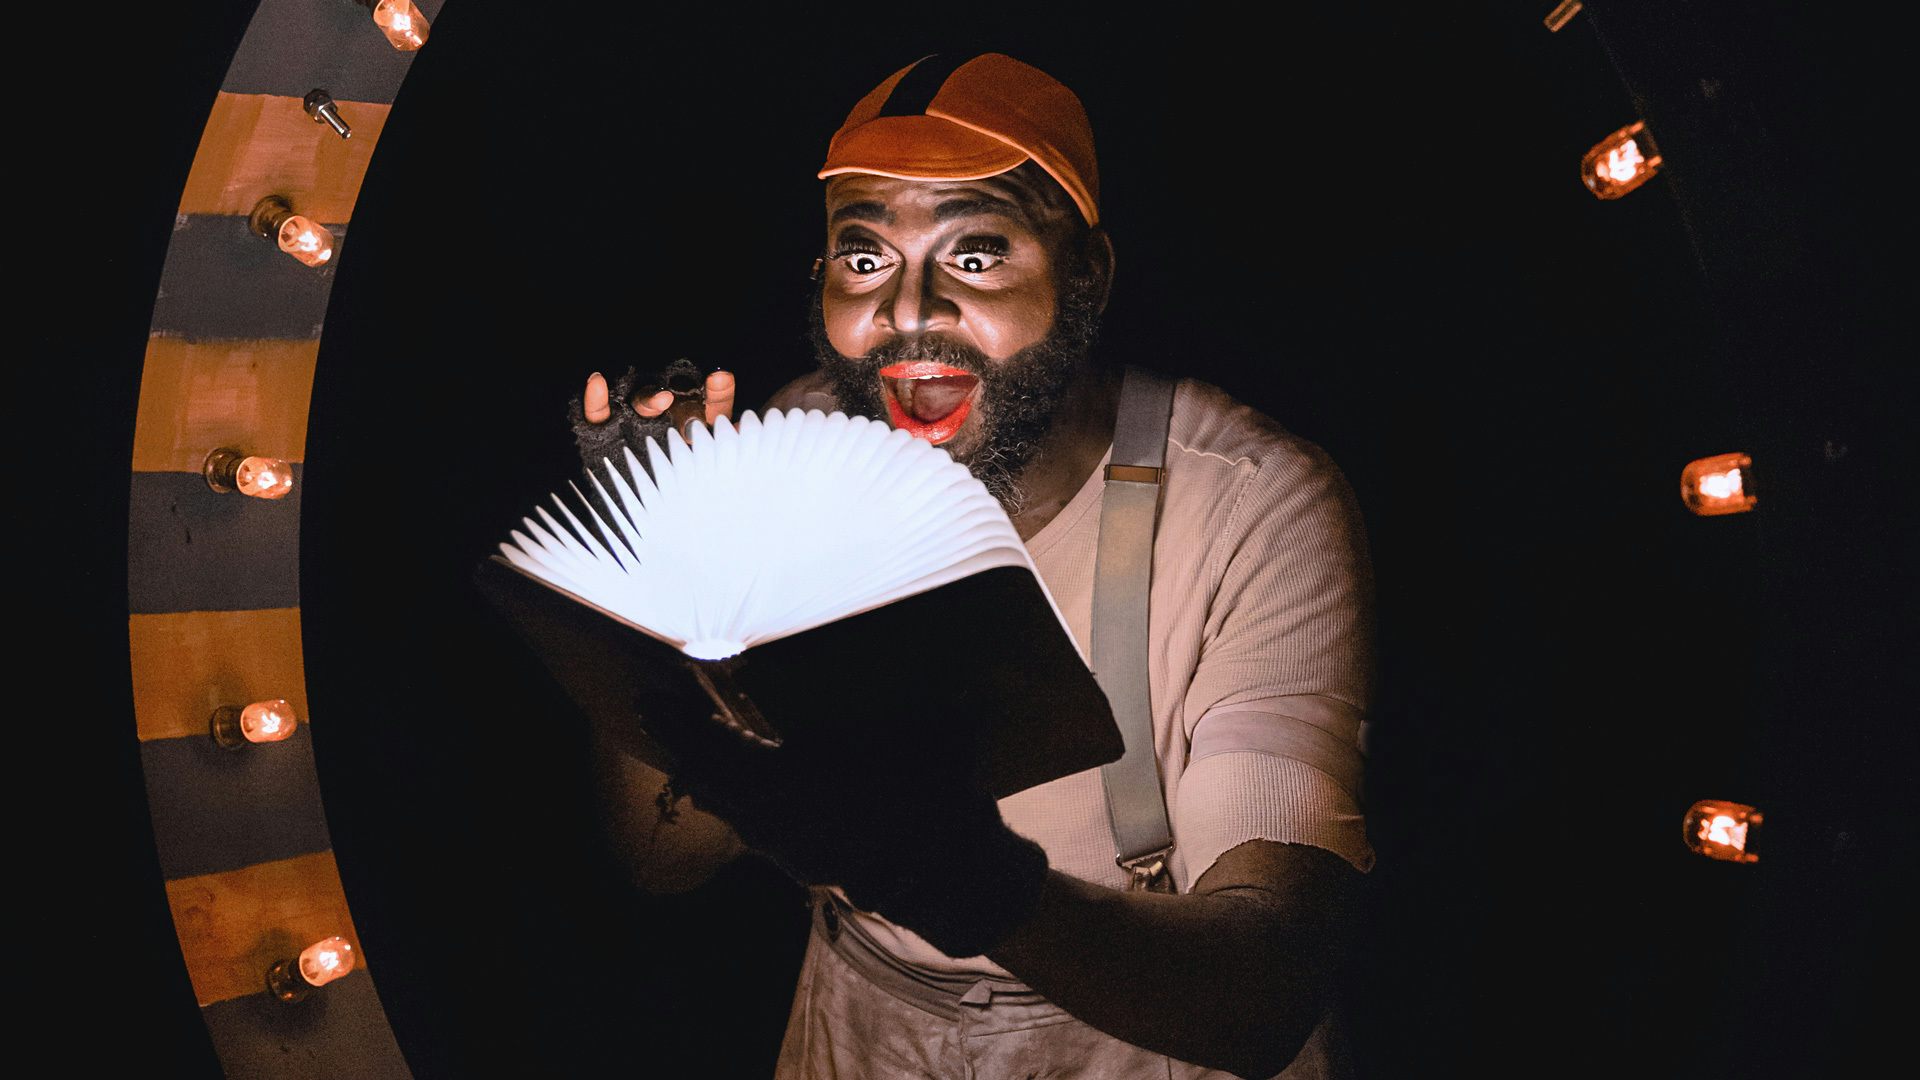 A man with a beard holds an open book that has light coming out of it. He has a surprised expression on his face.